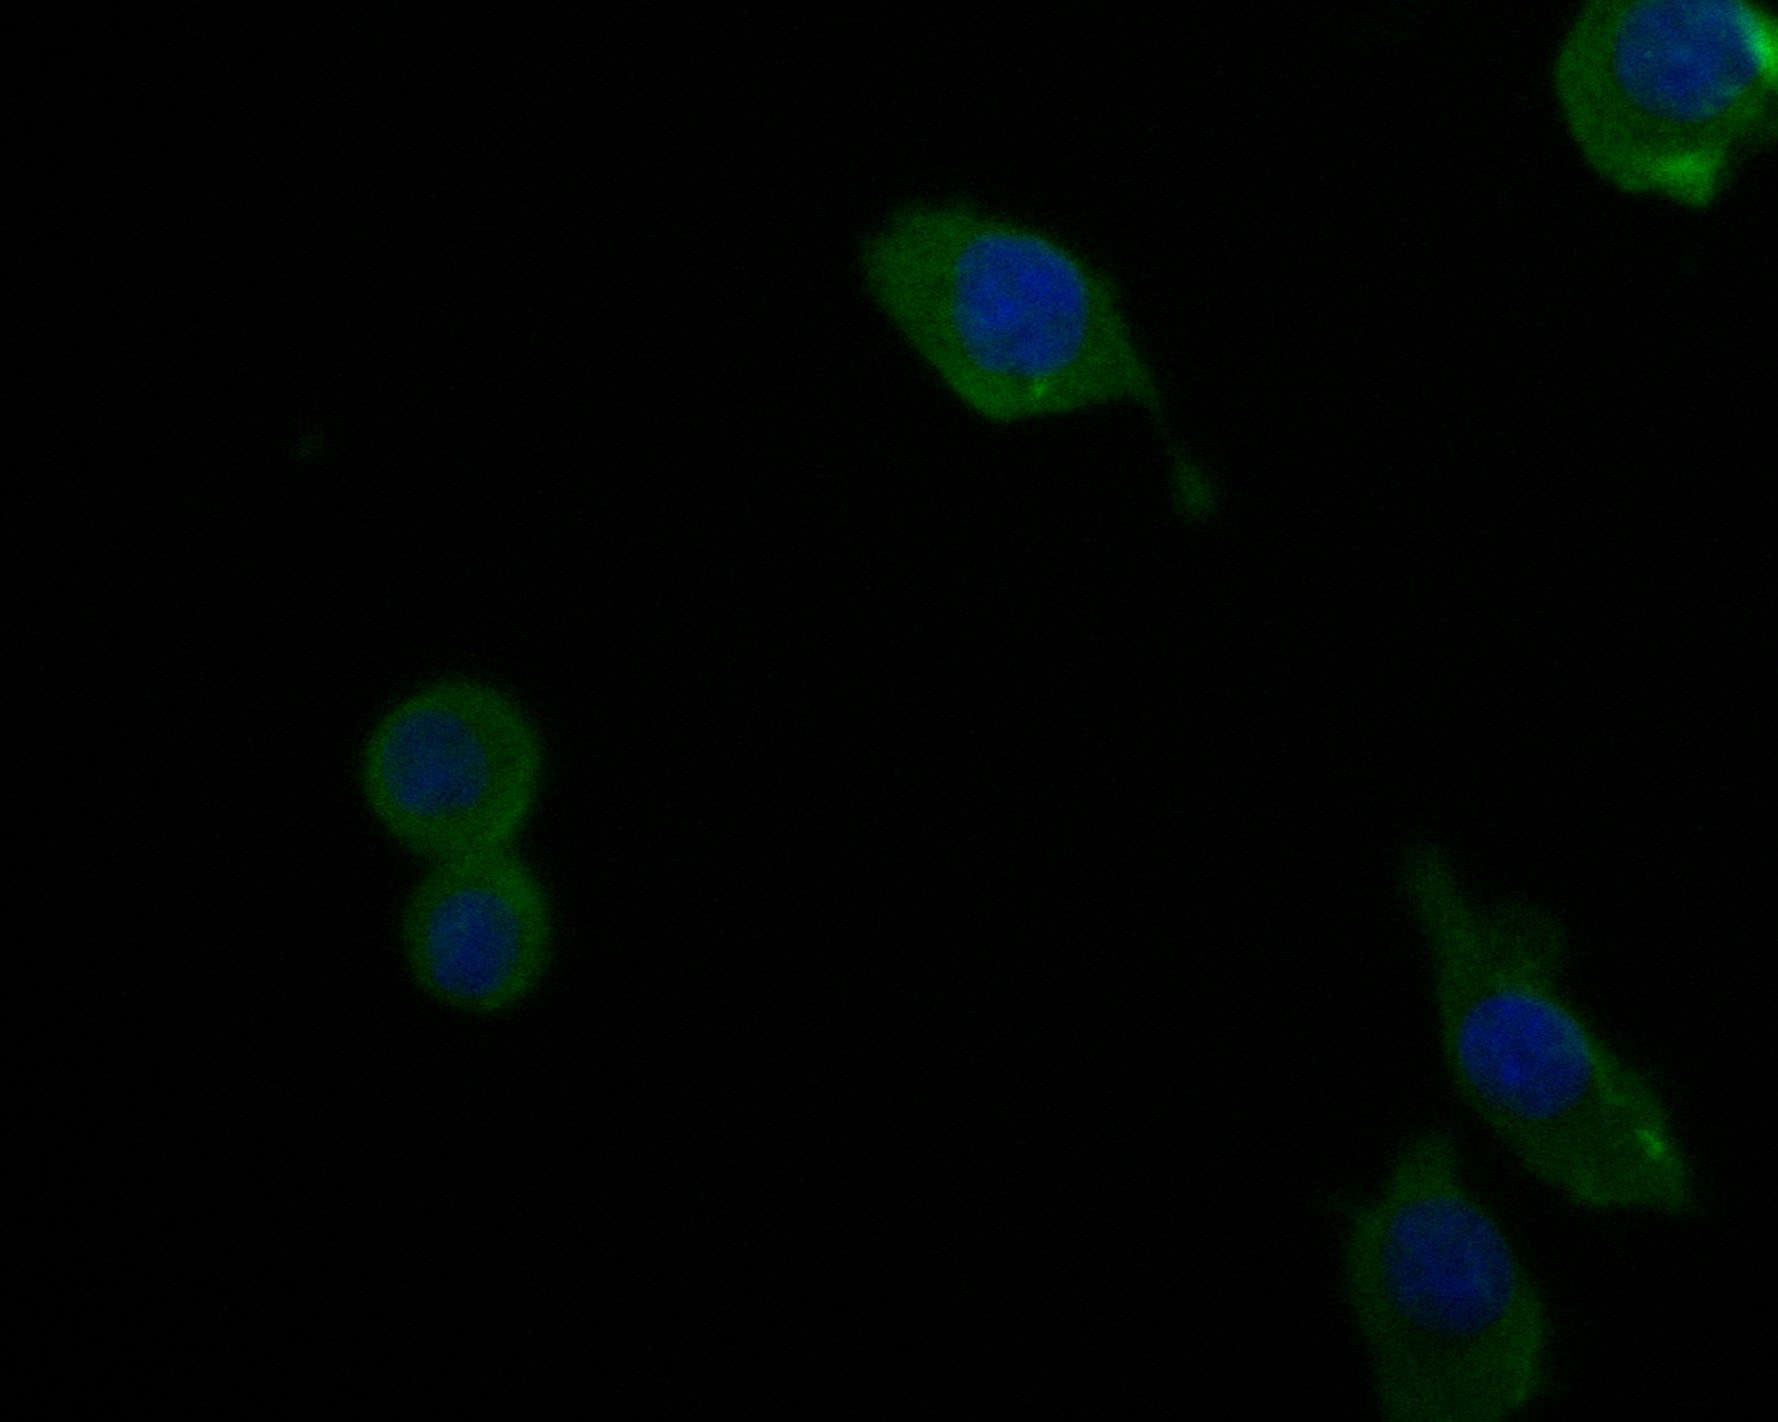 ICC staining of Complement factor B in SKOV-3 cells (green). Formalin fixed cells were permeabilized with 0.1% Triton X-100 in TBS for 10 minutes at room temperature and blocked with 1% Blocker BSA for 15 minutes at room temperature. Cells were probed with the primary antibody (<a href="/products/HA500036" style="font-weight: bold;text-decoration: underline;">HA500036</a>, 1/200) for 1 hour at room temperature, washed with PBS. Alexa Fluor&reg;488 Goat anti-Rabbit IgG was used as the secondary antibody at 1/1,000 dilution. The nuclear counter stain is DAPI (blue).